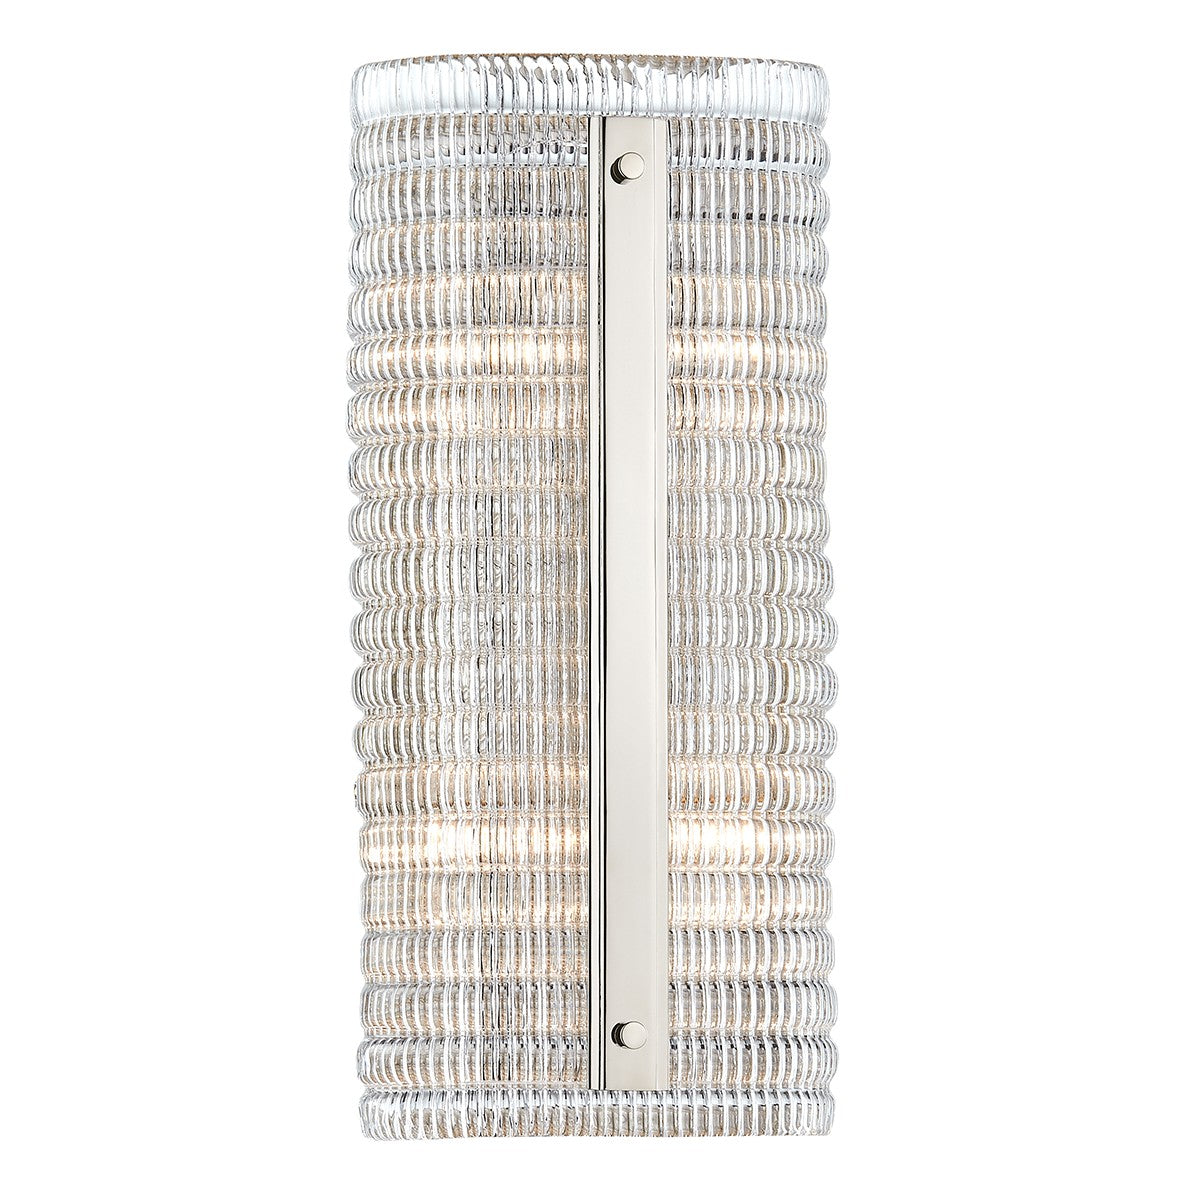 Hudson Valley - 2854-PN - Four Light Wall Sconce - Athens - Polished Nickel